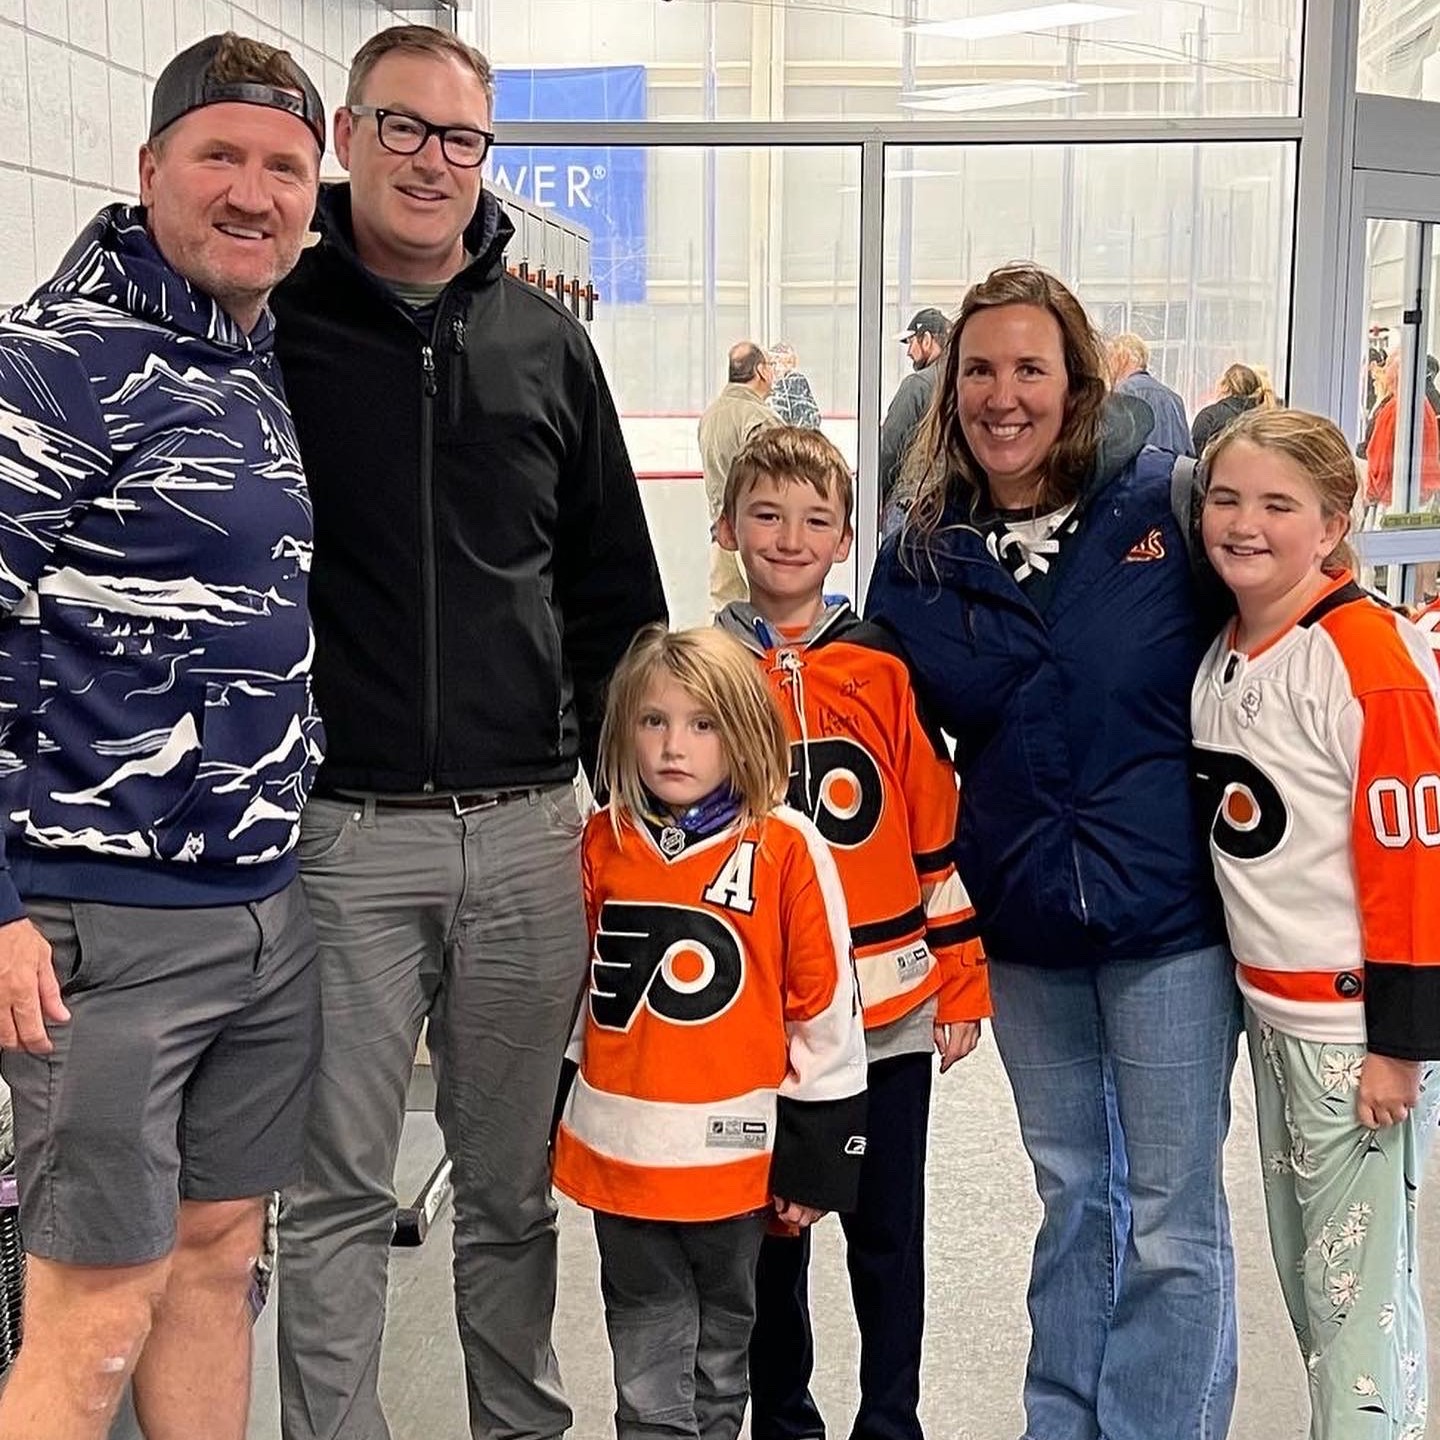 Our hockey family posing with a player during spring training